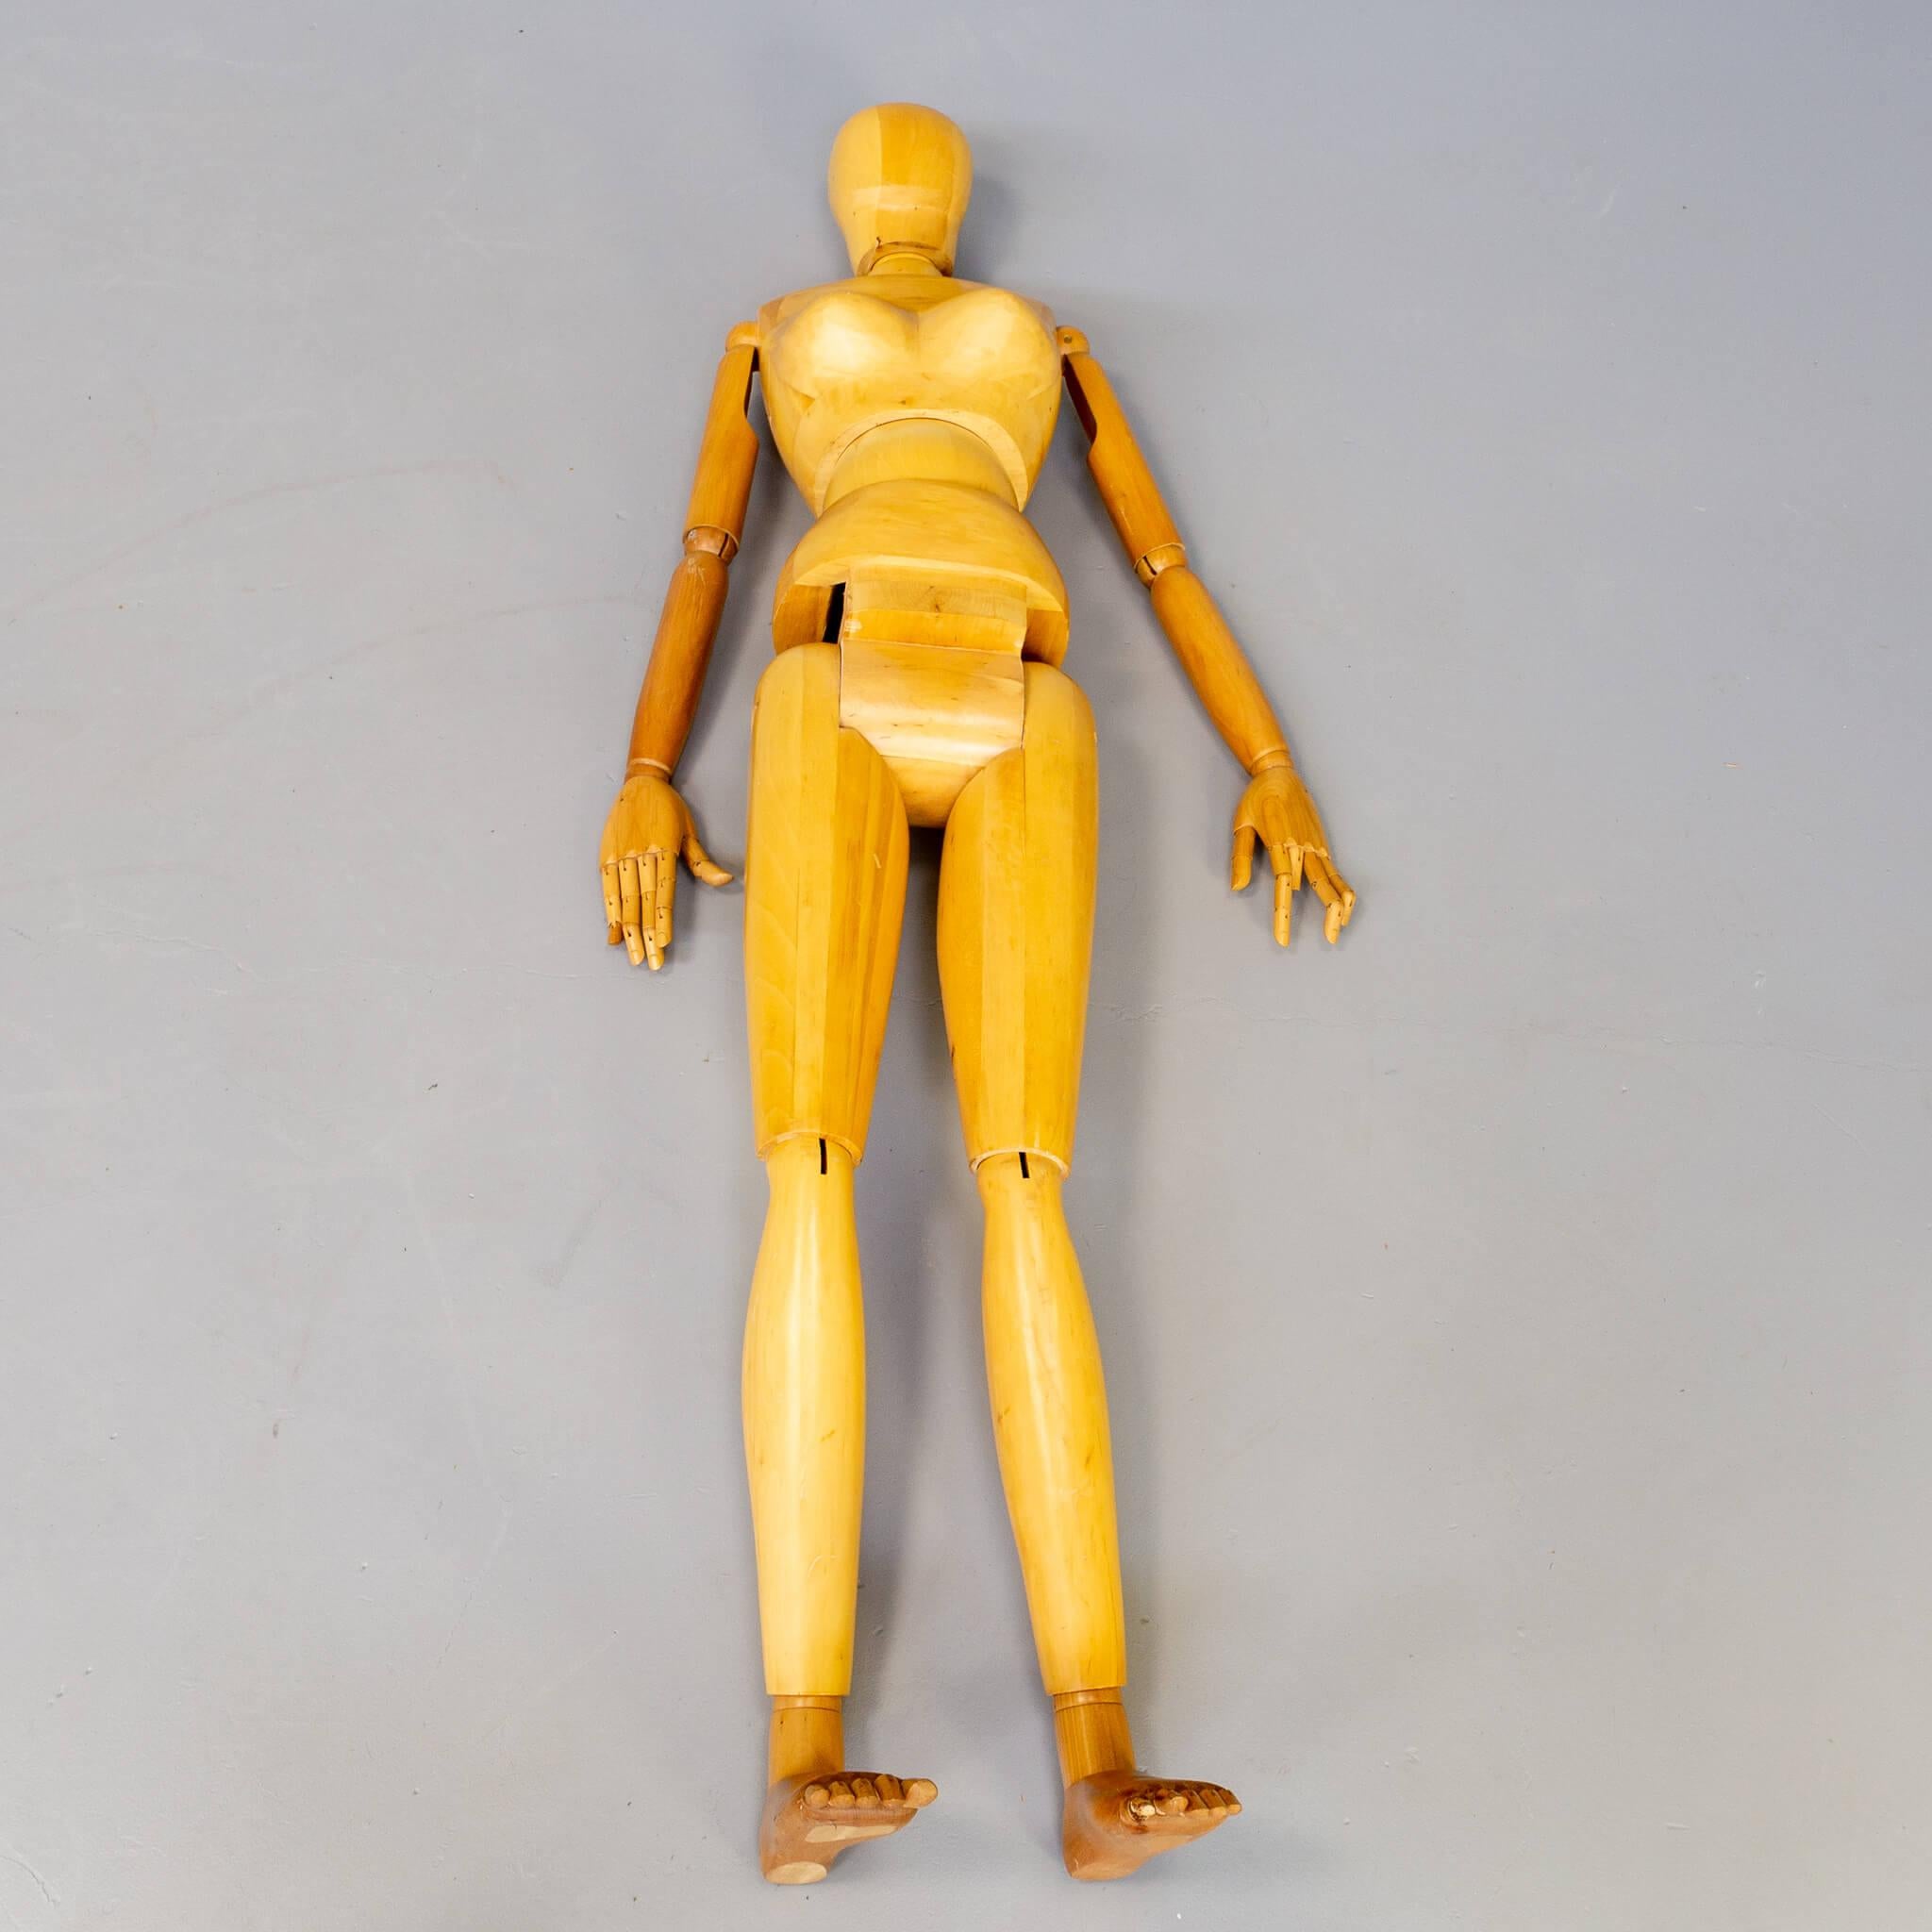 Beech Live-Size Articulated Wooden Artist Model Mannequin For Sale